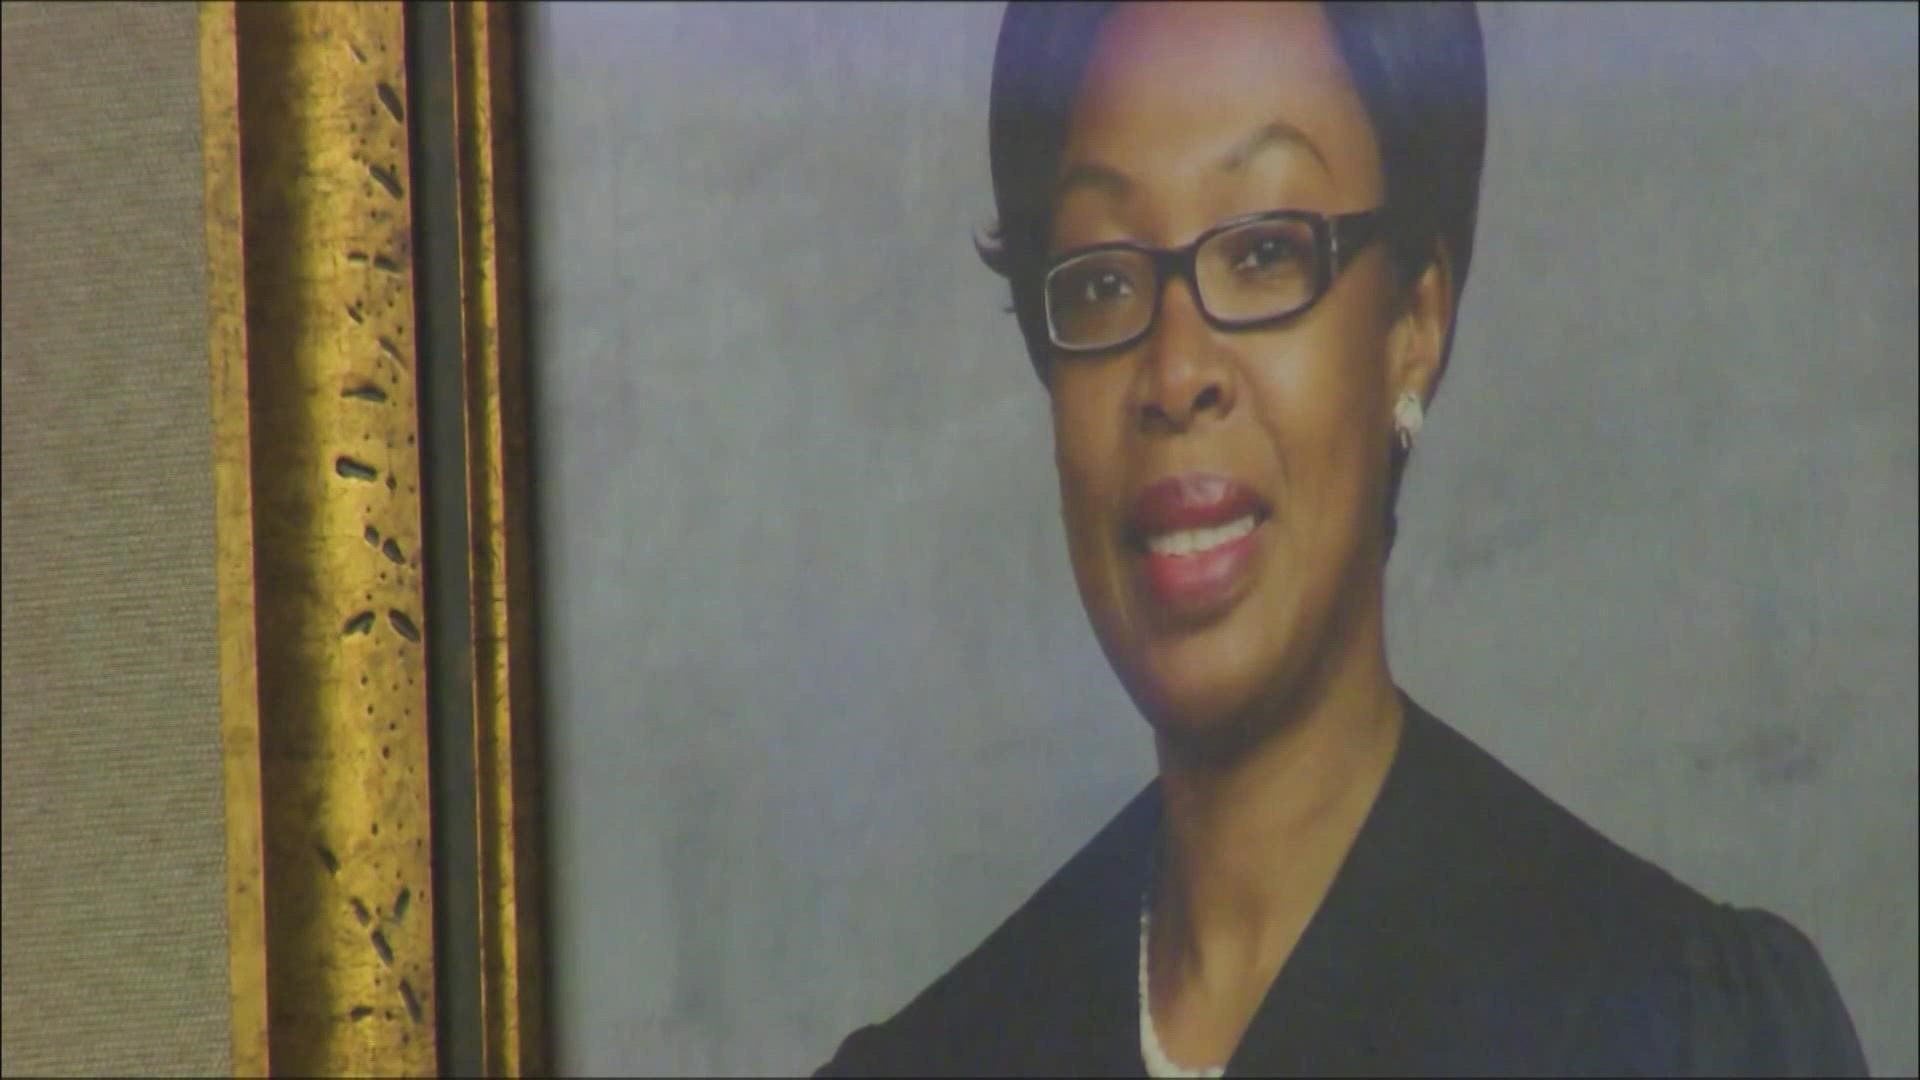 Judge Chika Anyiam removed herself from the case after the Dallas District attorney filed a motion that she be recused.